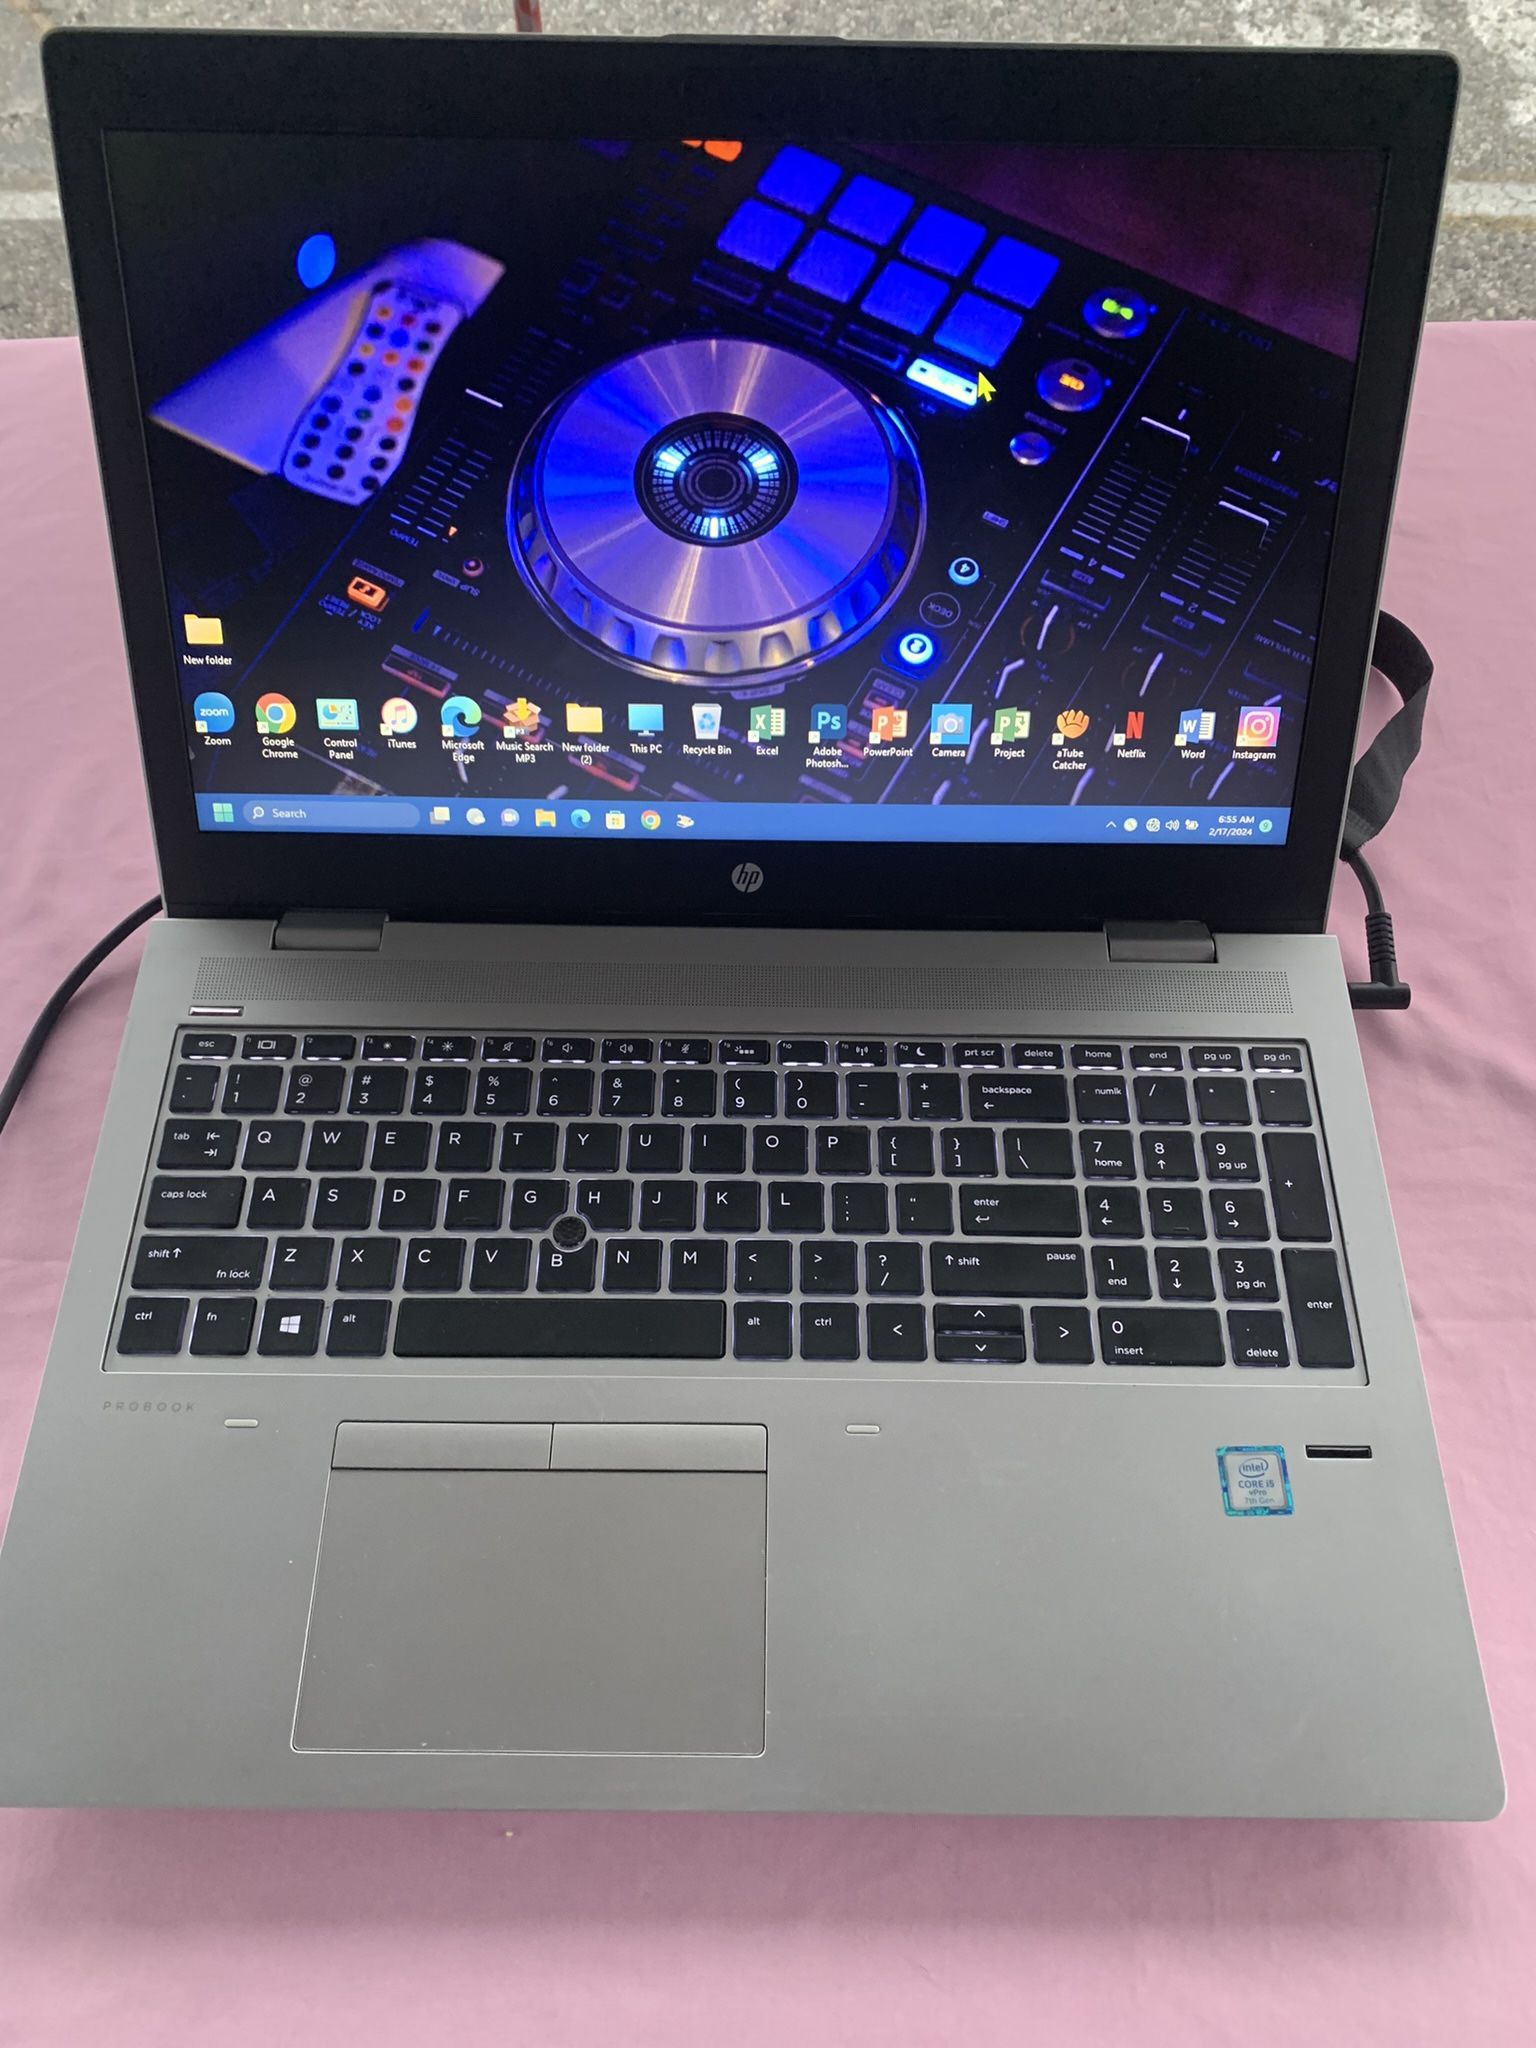 i5…i5…HP PROBOOK .  7 GENERATION  PHOTOSHOP and MICROSOFT build On  07/12/2019….128.0 GB SSD  ( Capacity  ) ..8.0 GB RAM . READY FOR CLASSES   